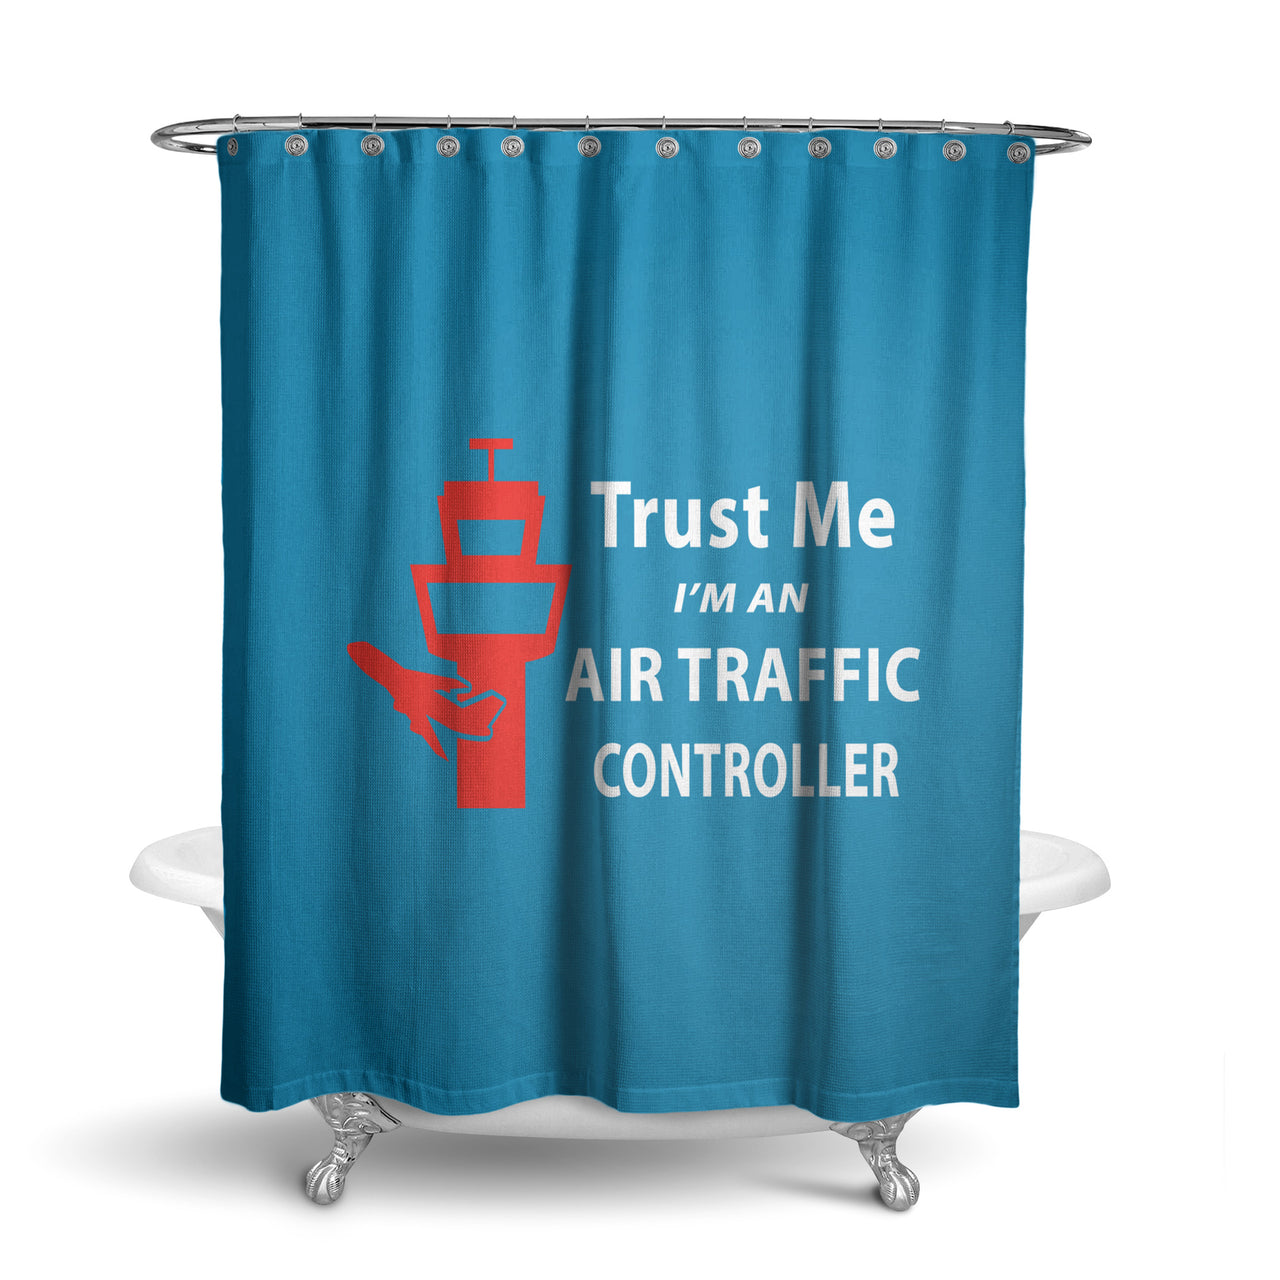 Trust Me I'm an Air Traffic Controller Designed Shower Curtains